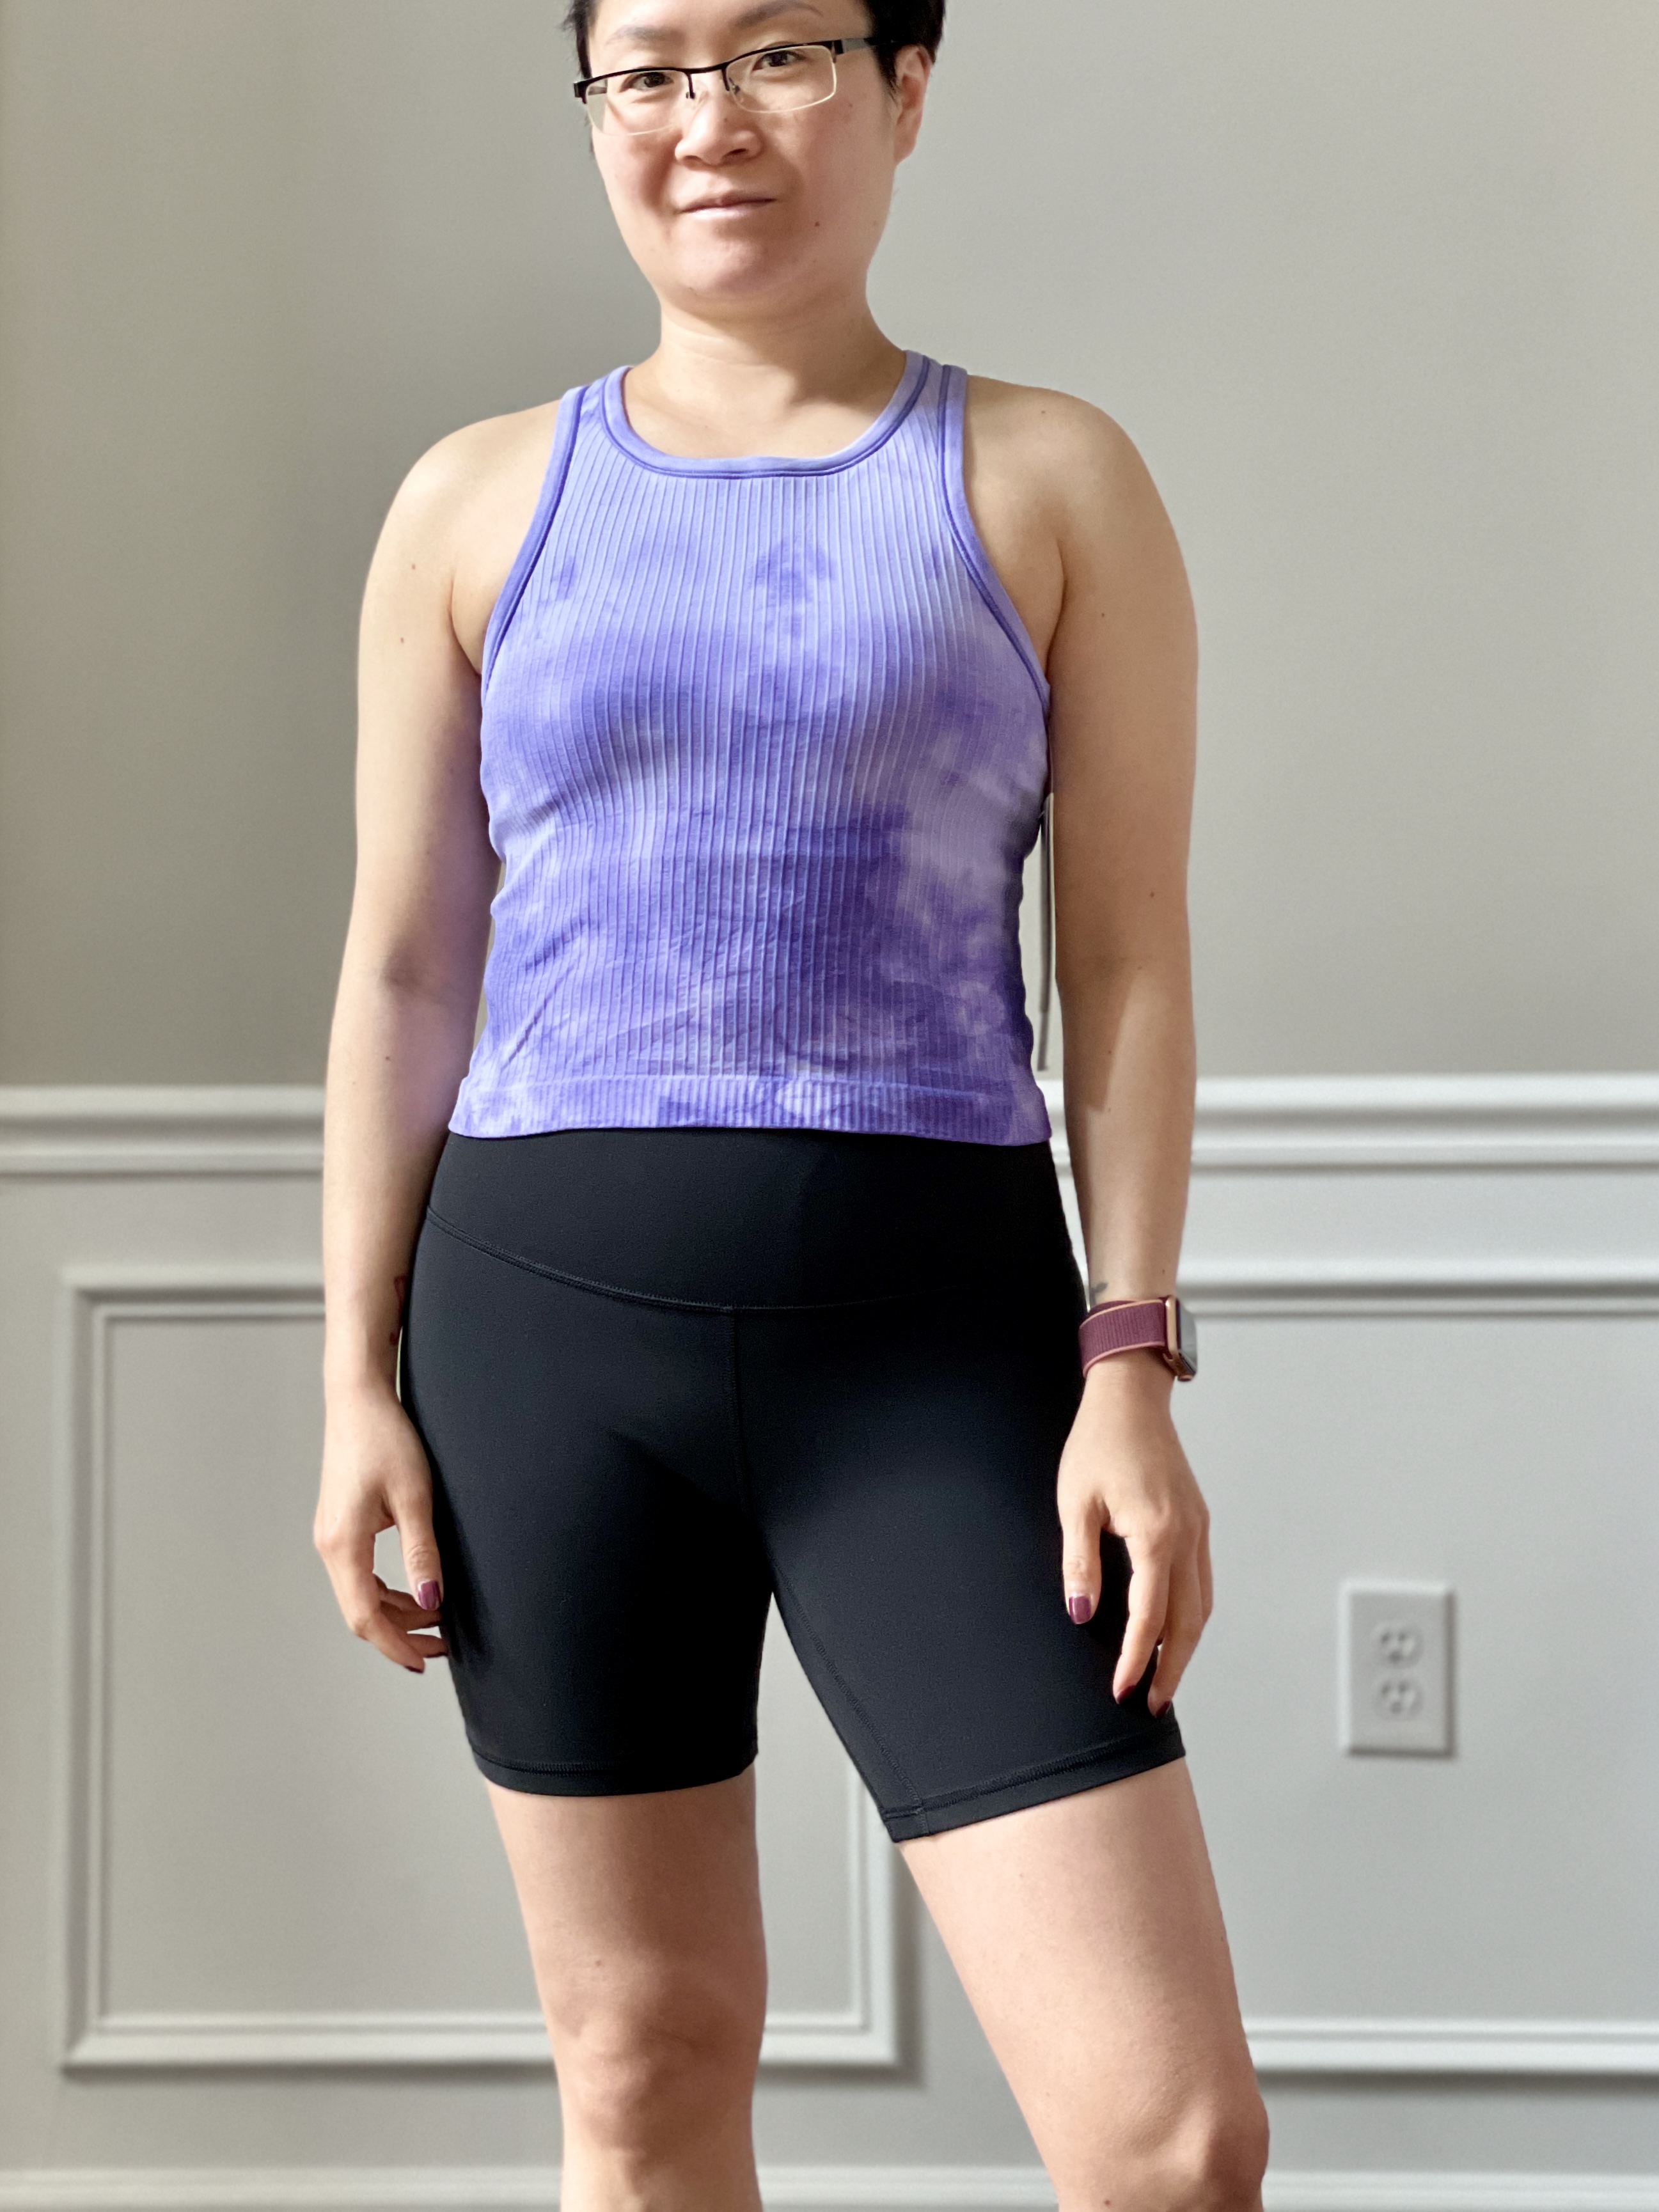 Fit Review Friday! Hotty Hot HR Short 2.5 Diamond Dye, Swiftly